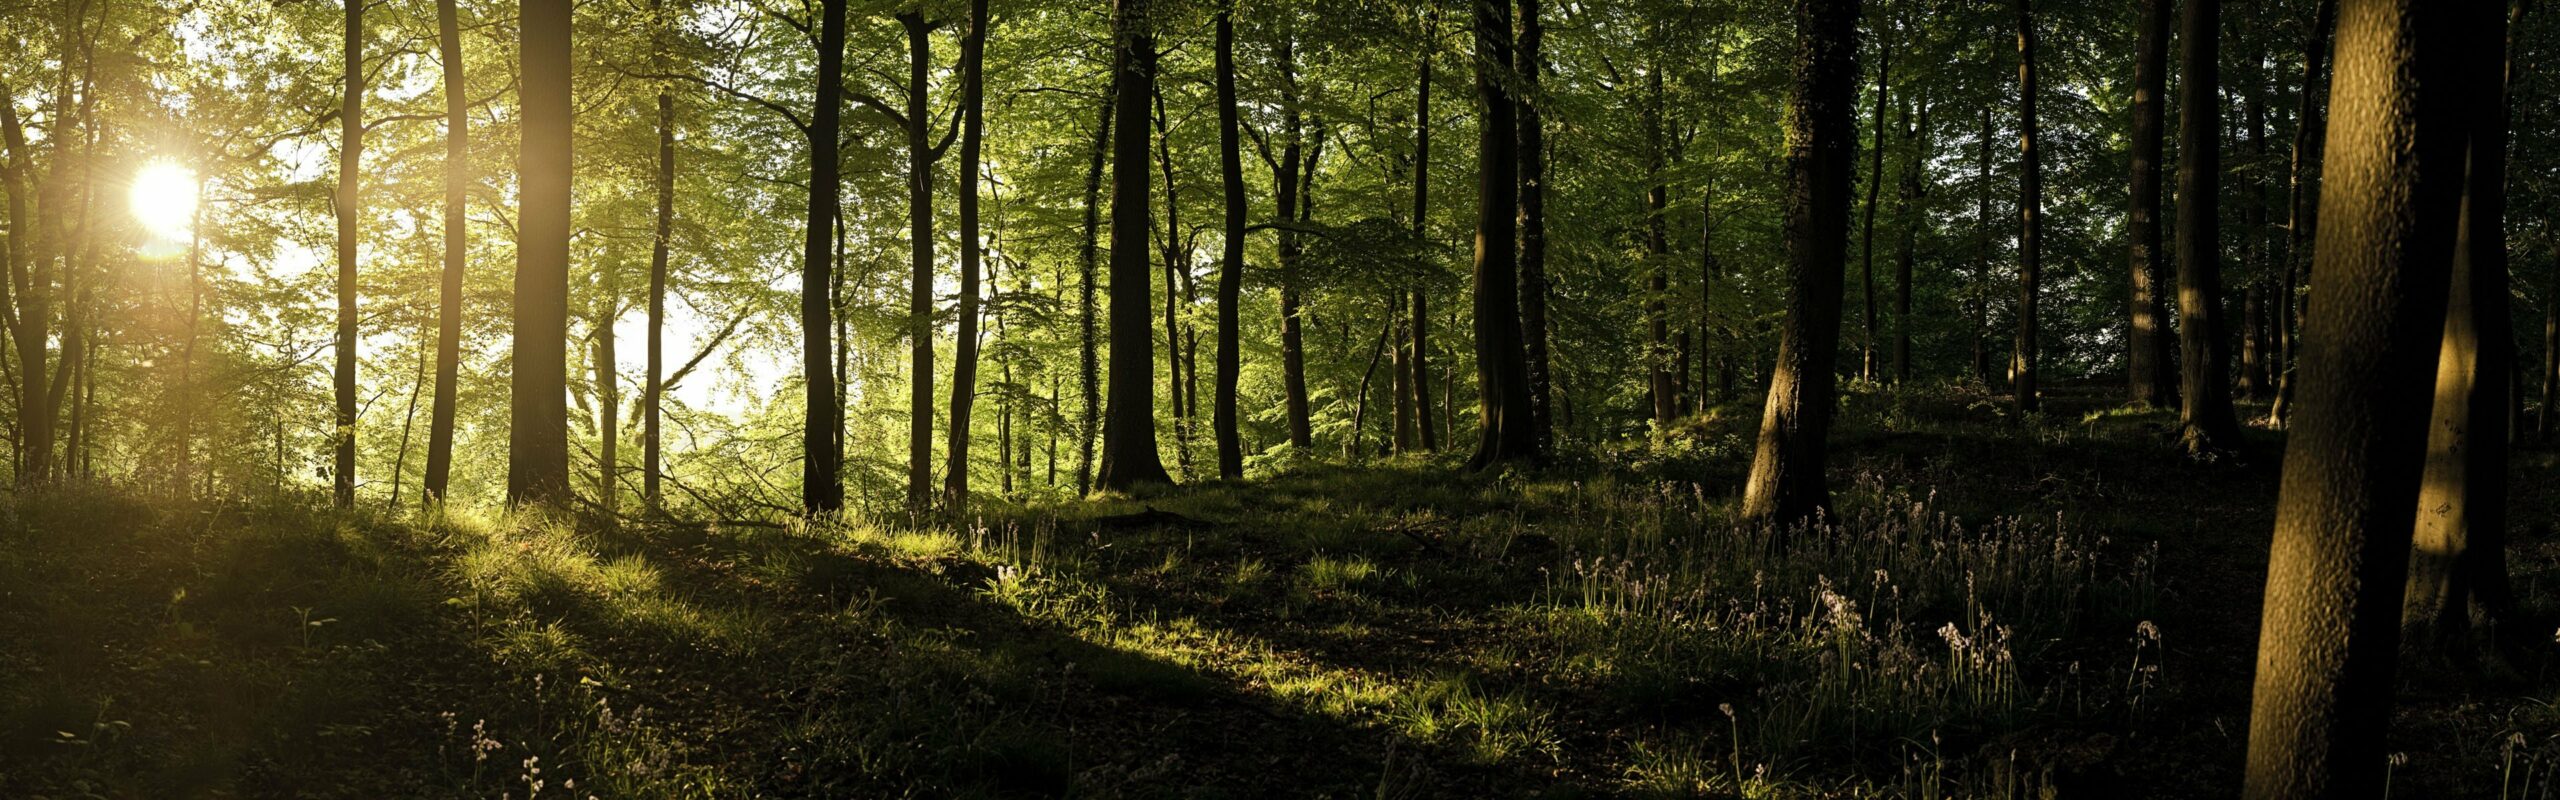 Trees England forests sunlight United Kingdom panorama wallpaper